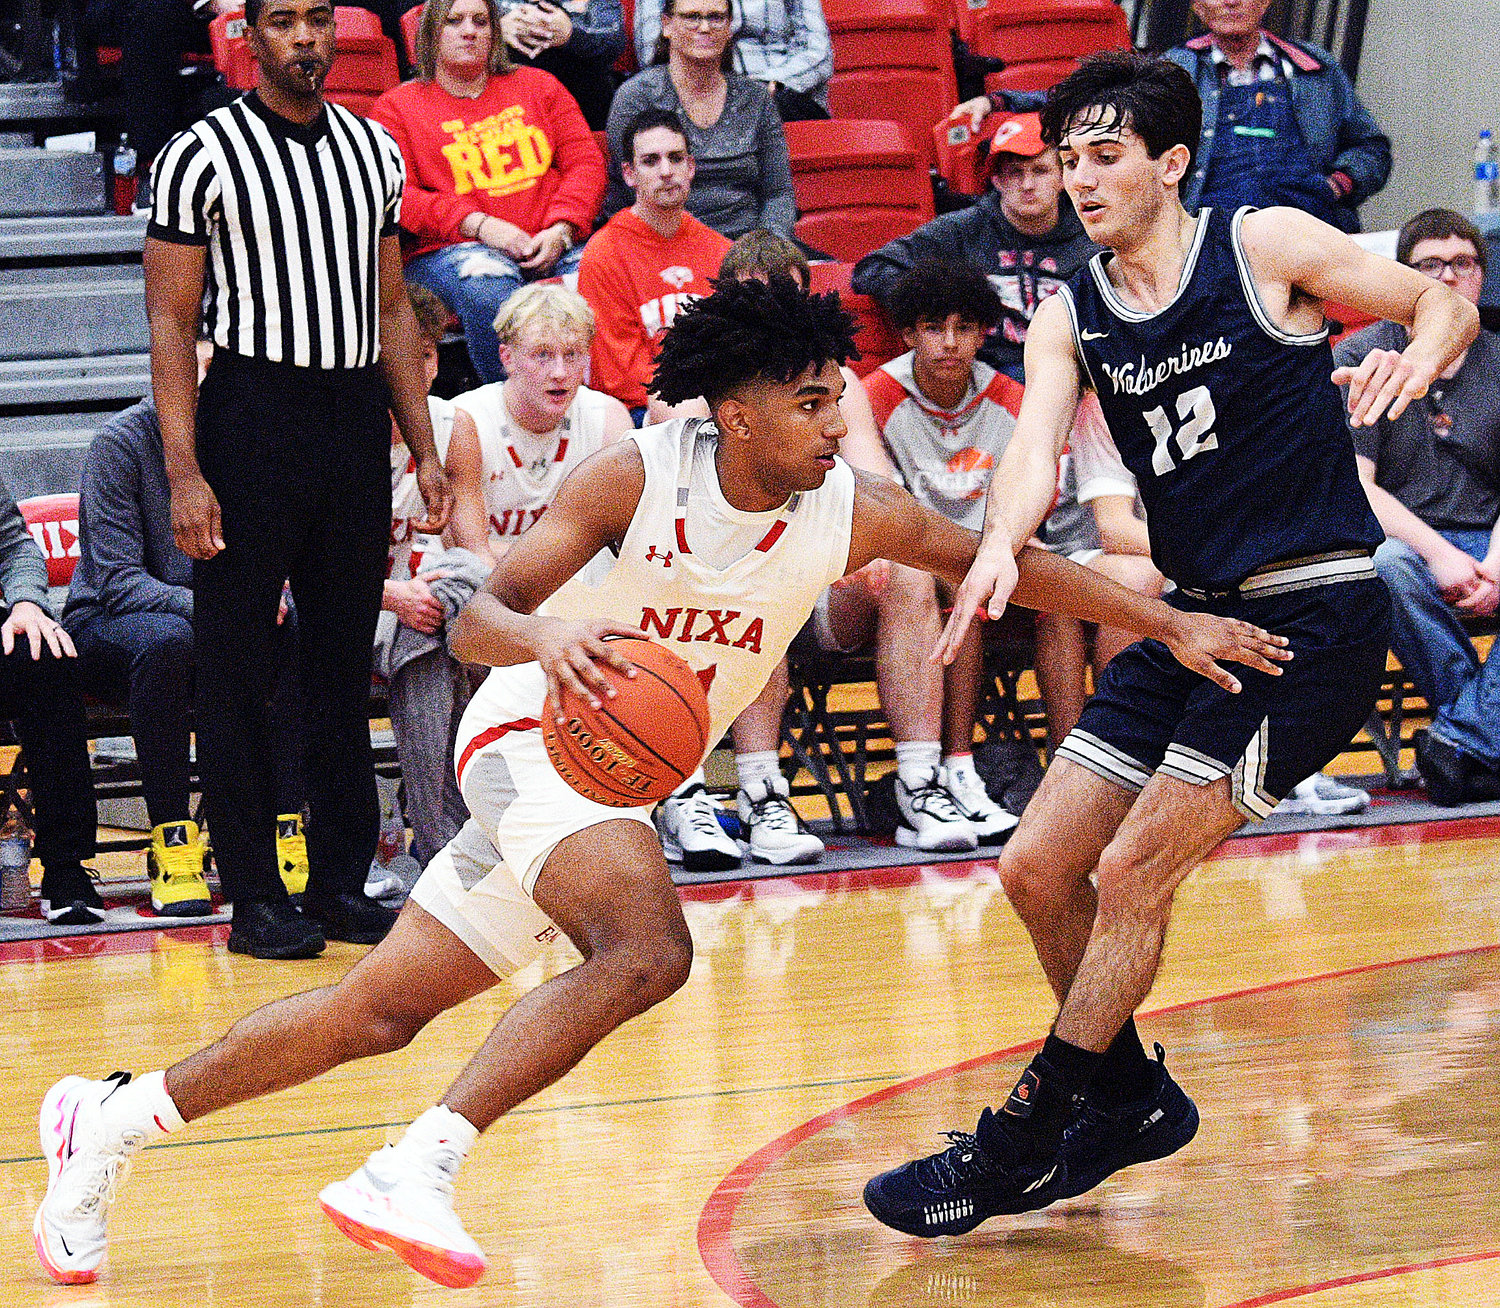 NIXA’S KAEL COMBS makes a move to the basket versus Bentonville West on Friday.